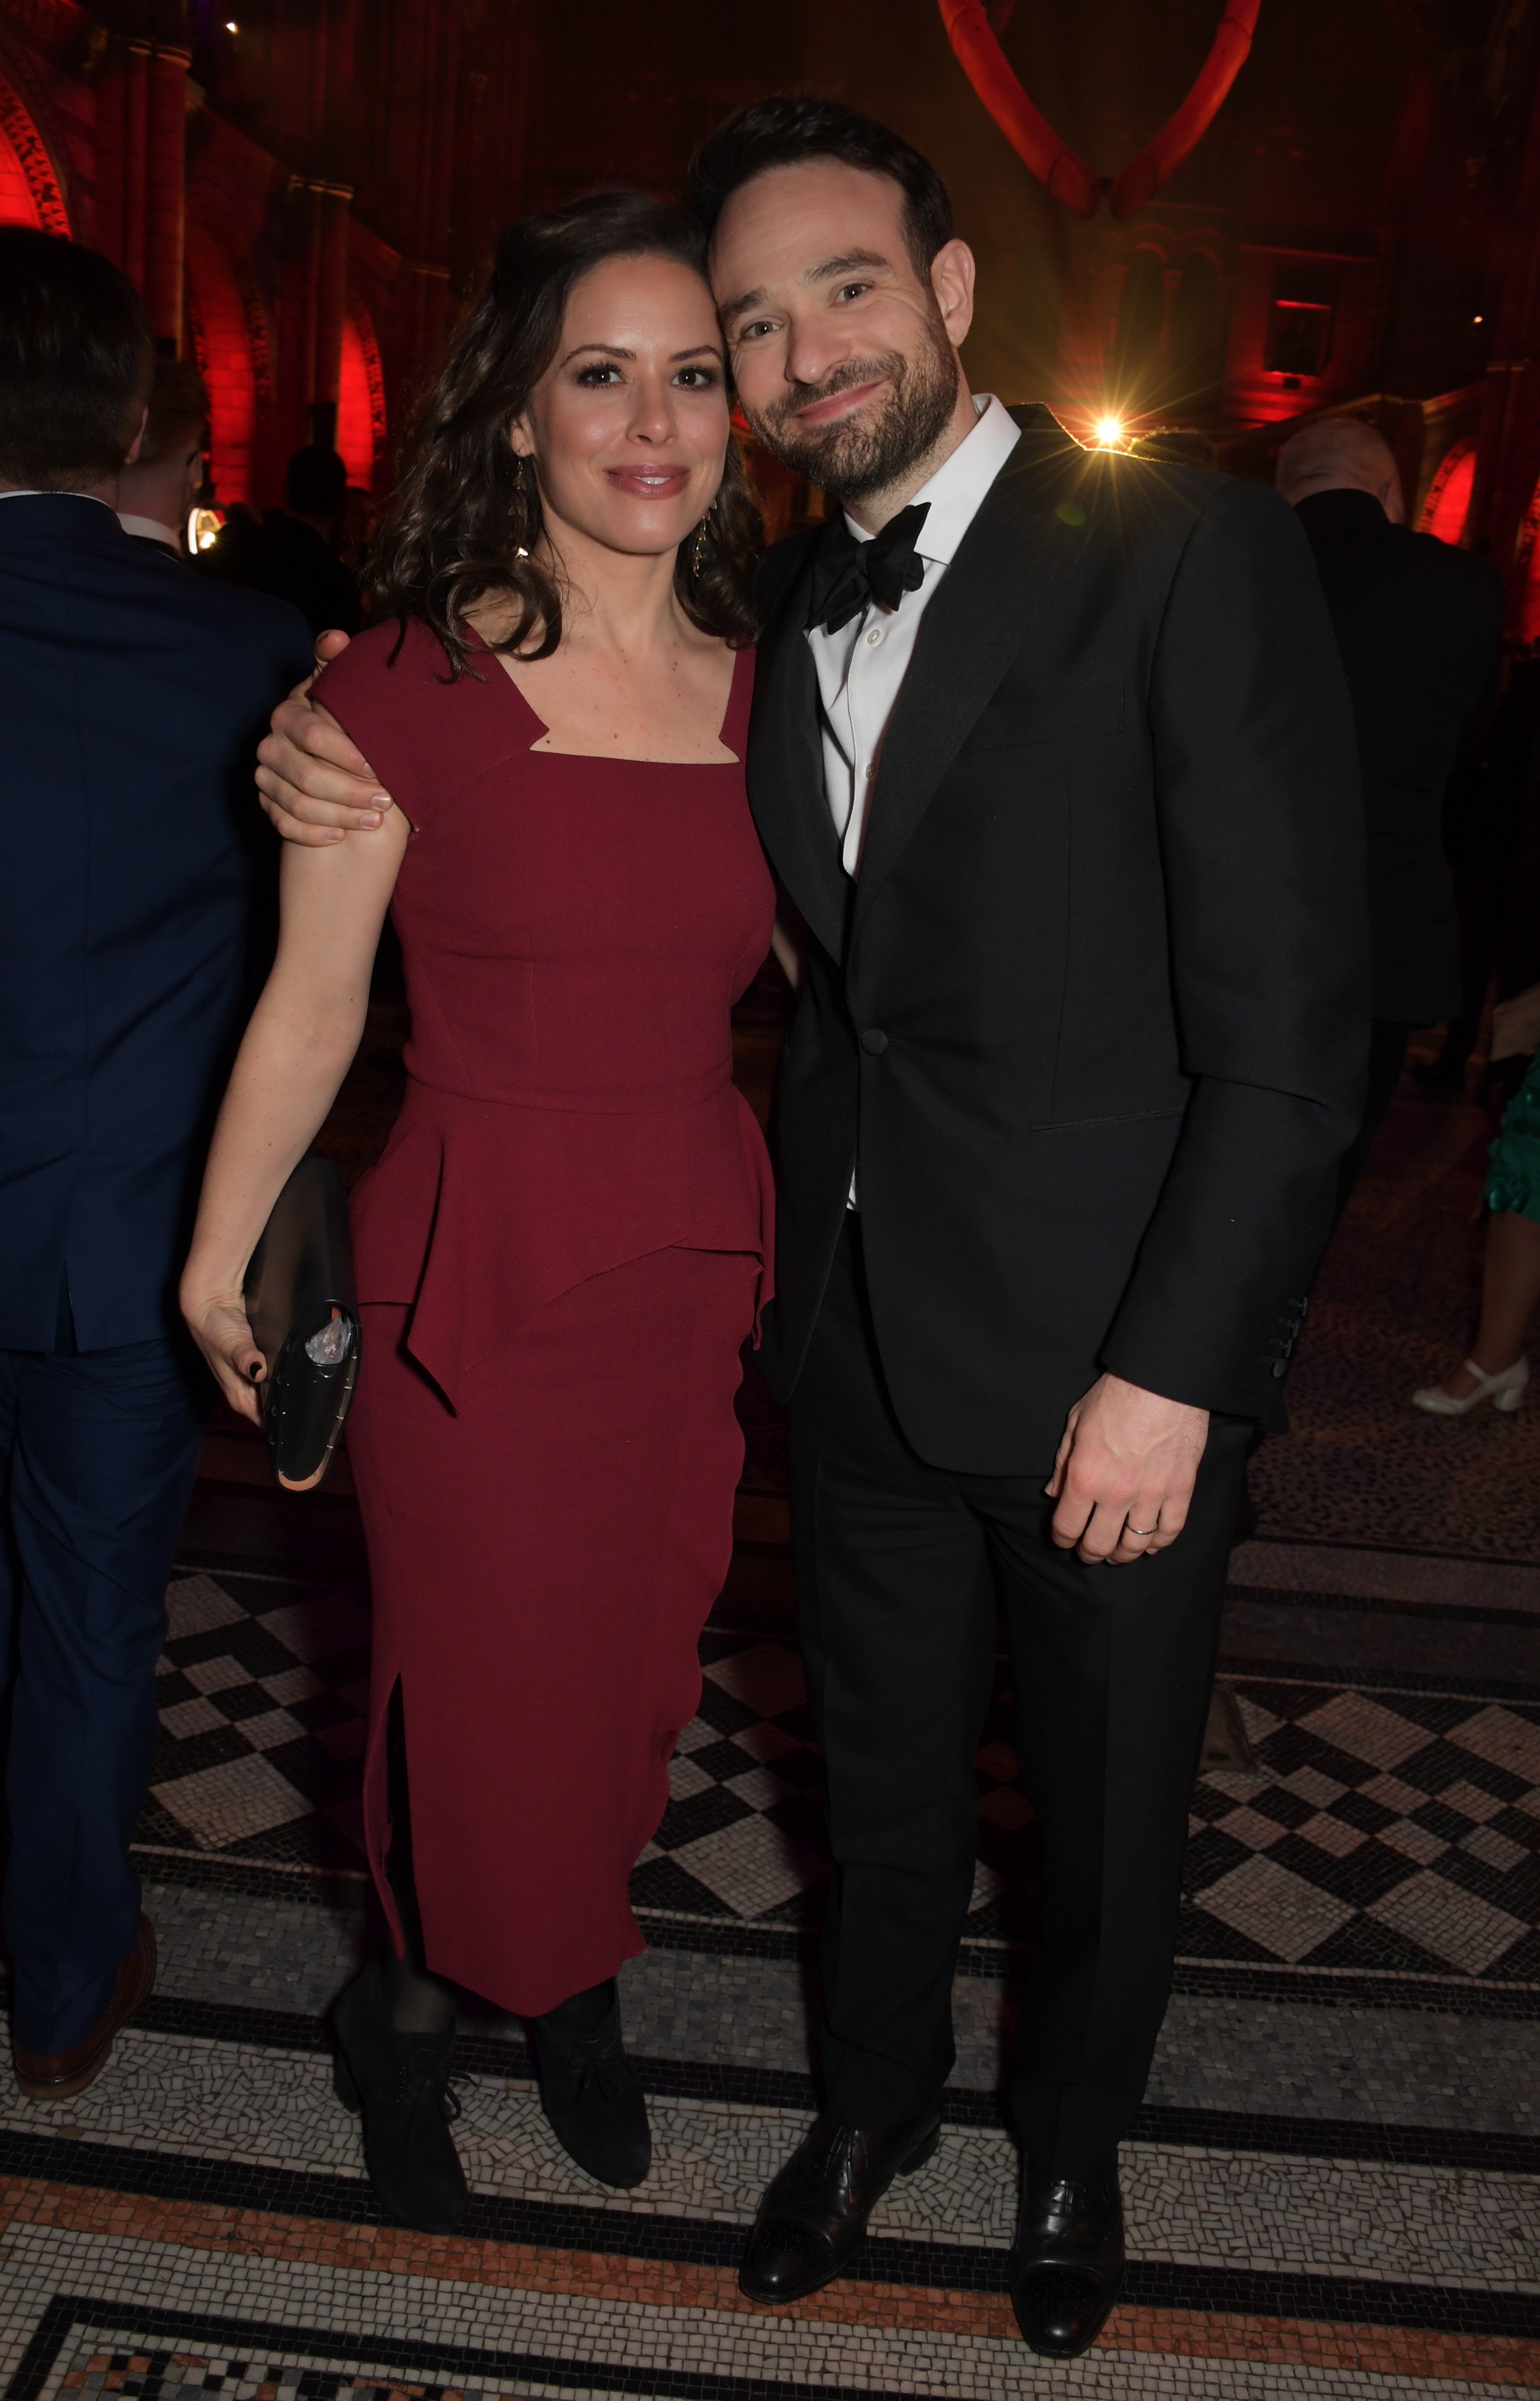 Samantha Thomas and Charlie Cox at the 2019 Olivier Awards after party on April 7, 2019 | Source: Getty Images